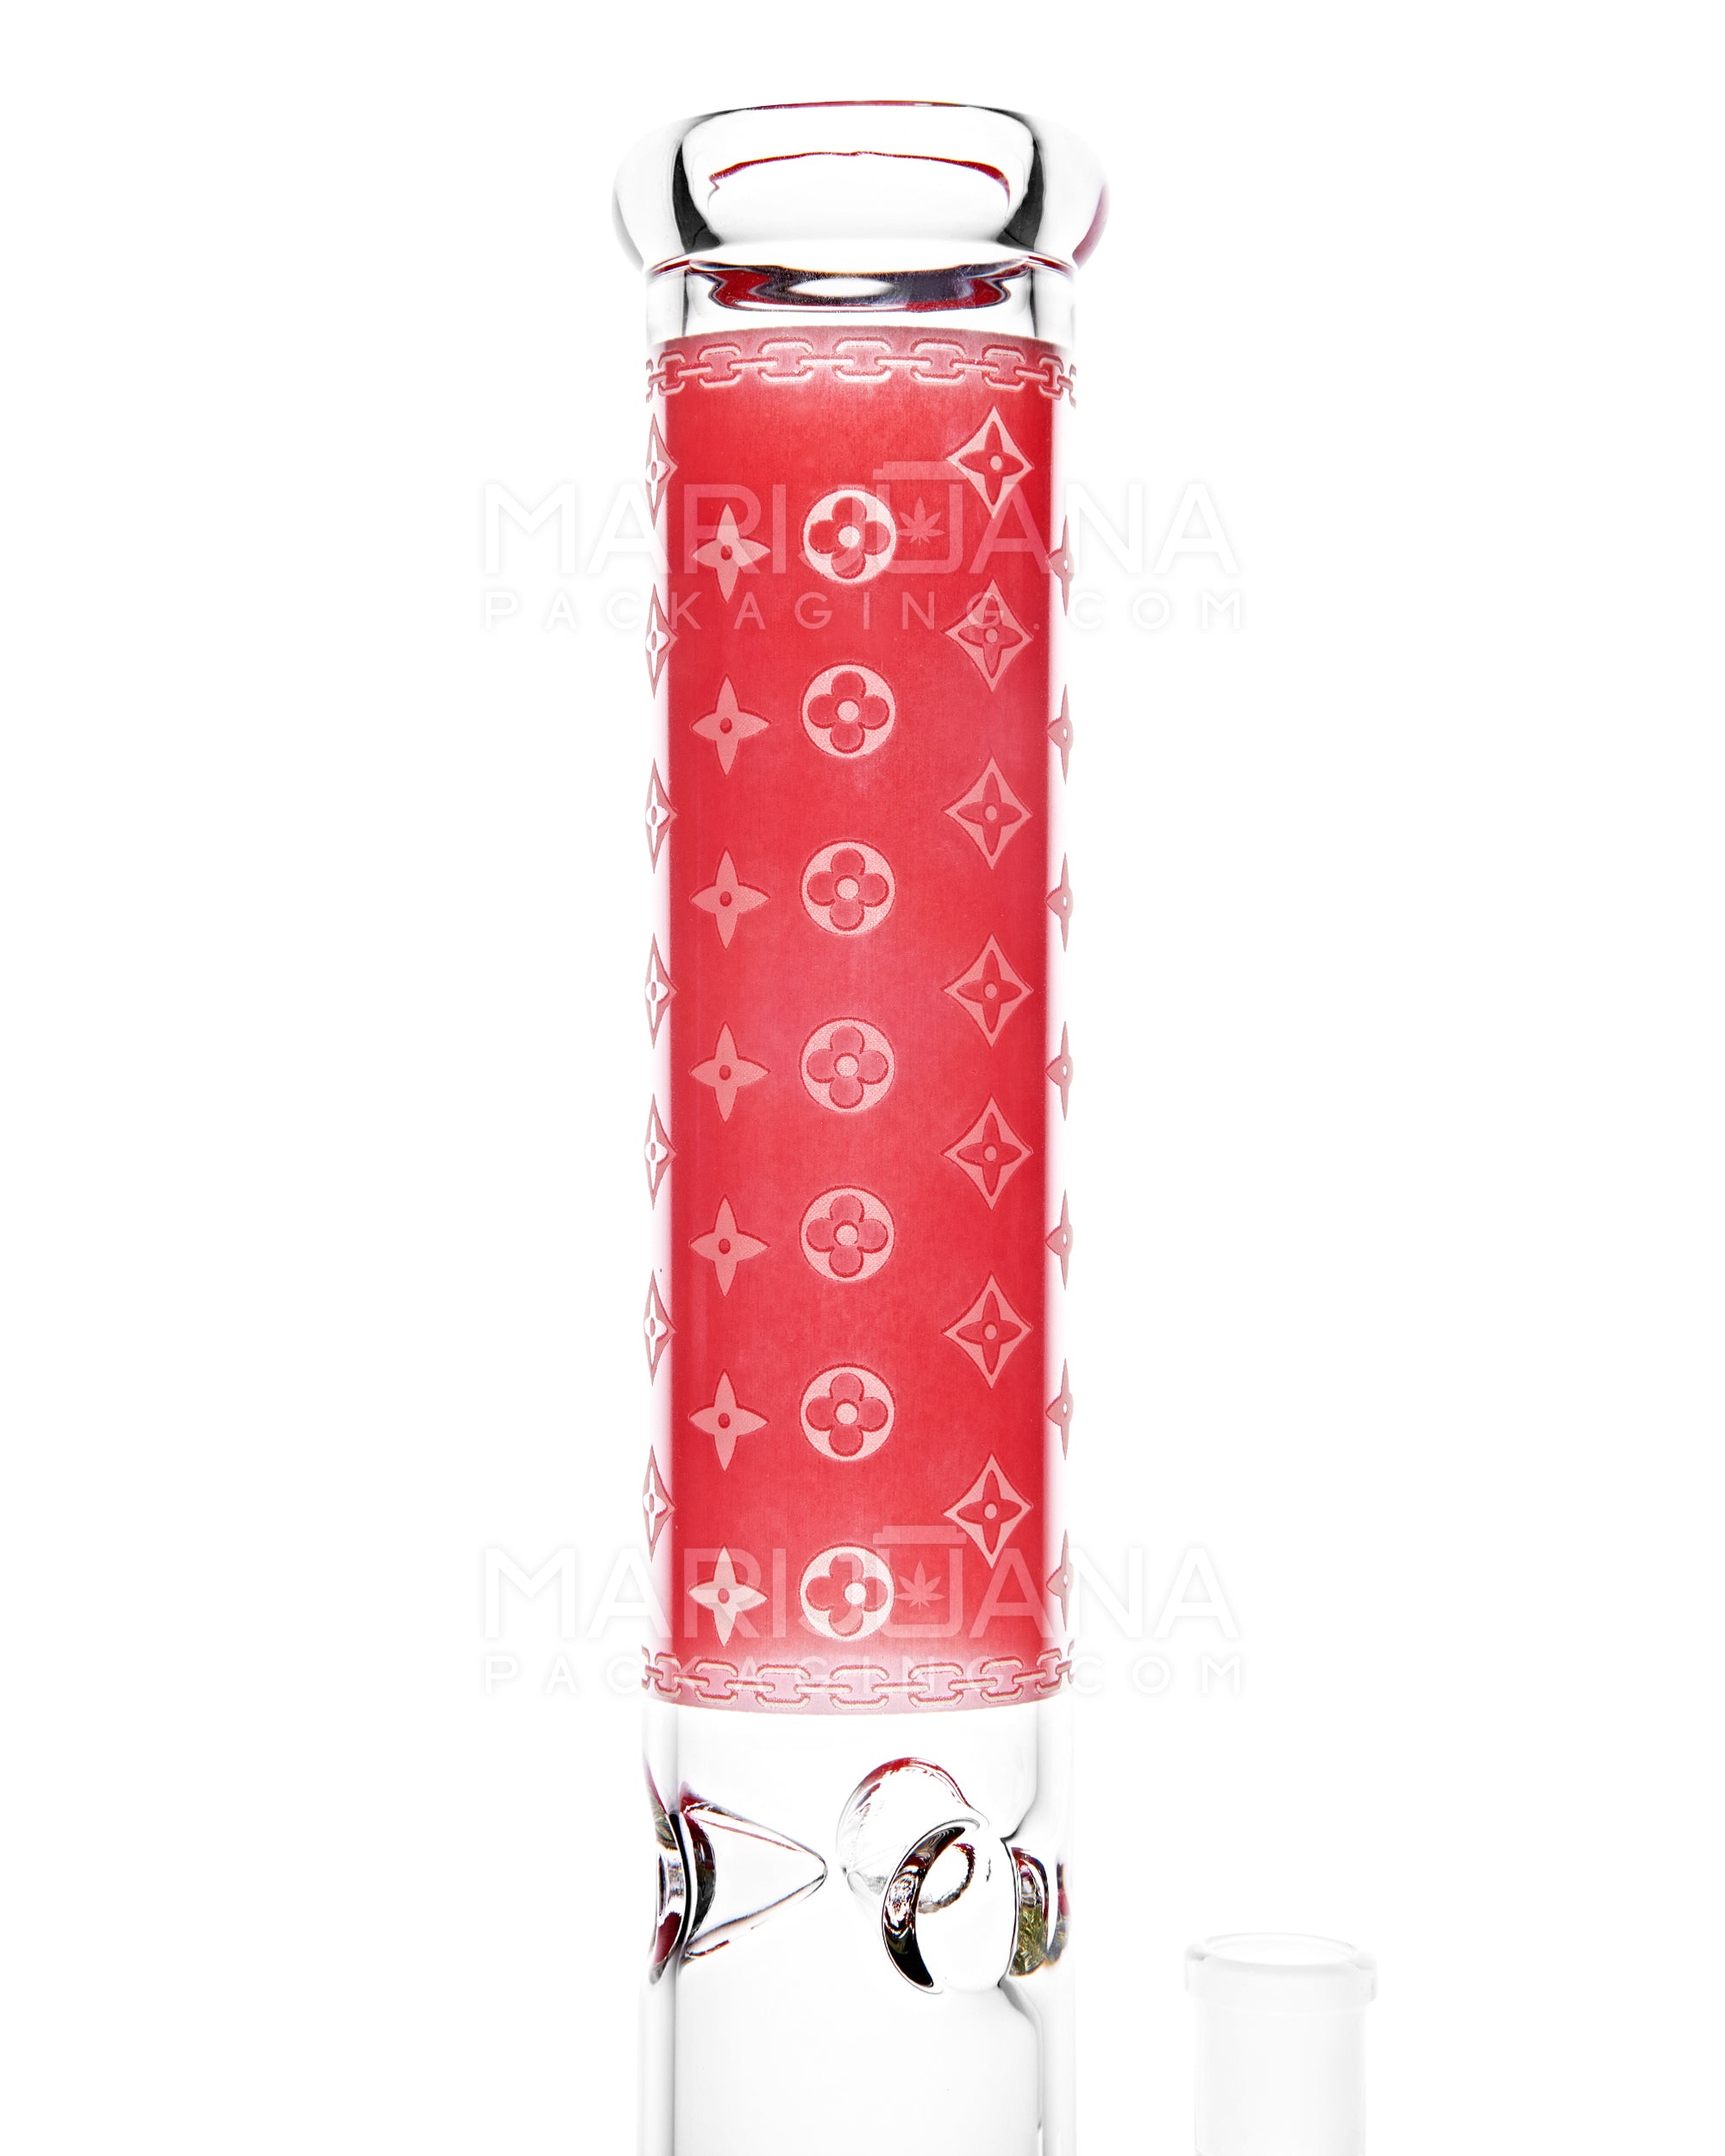 Straight Neck Luxury Design Inline Perc Glass Water Pipe w/ Ice Catcher | 14in Tall - 14mm Bowl - Red - 4